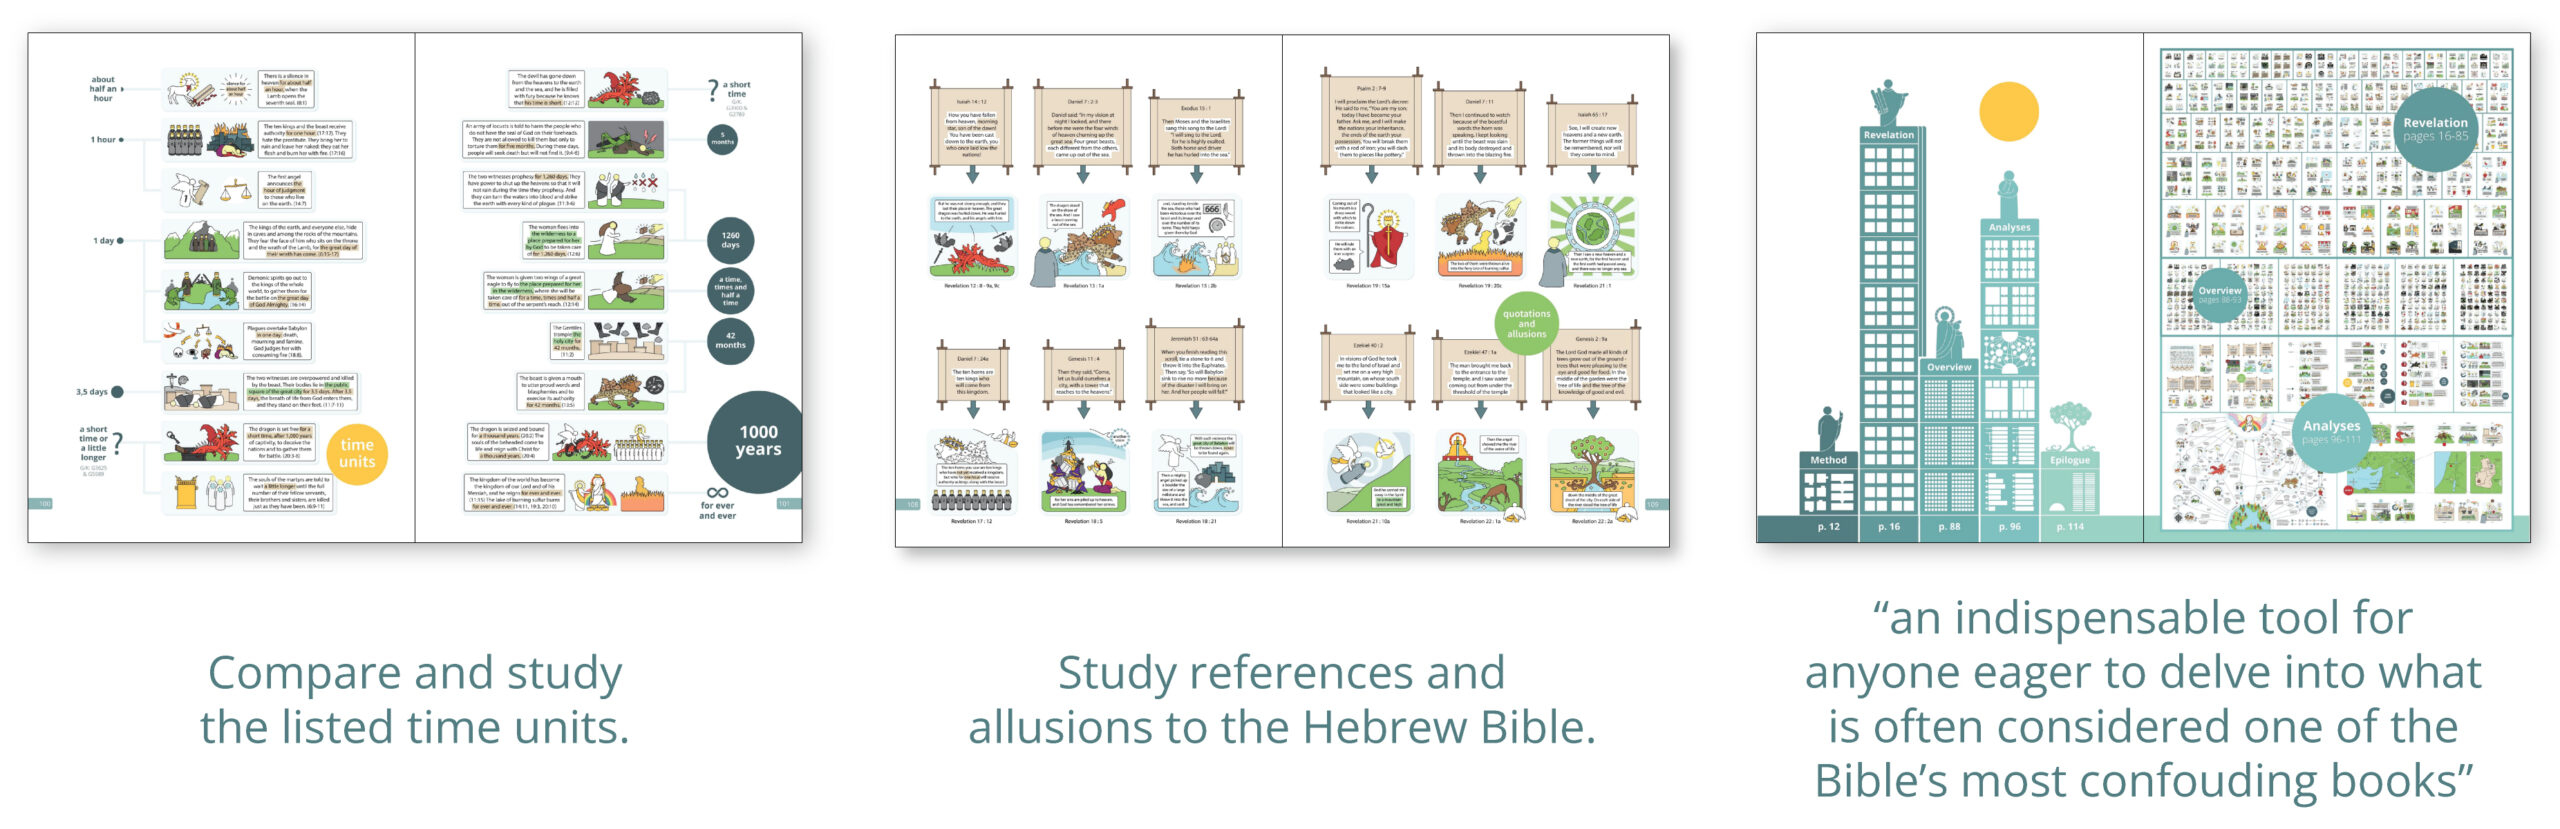 study references and allusions to the Hebrew Bible